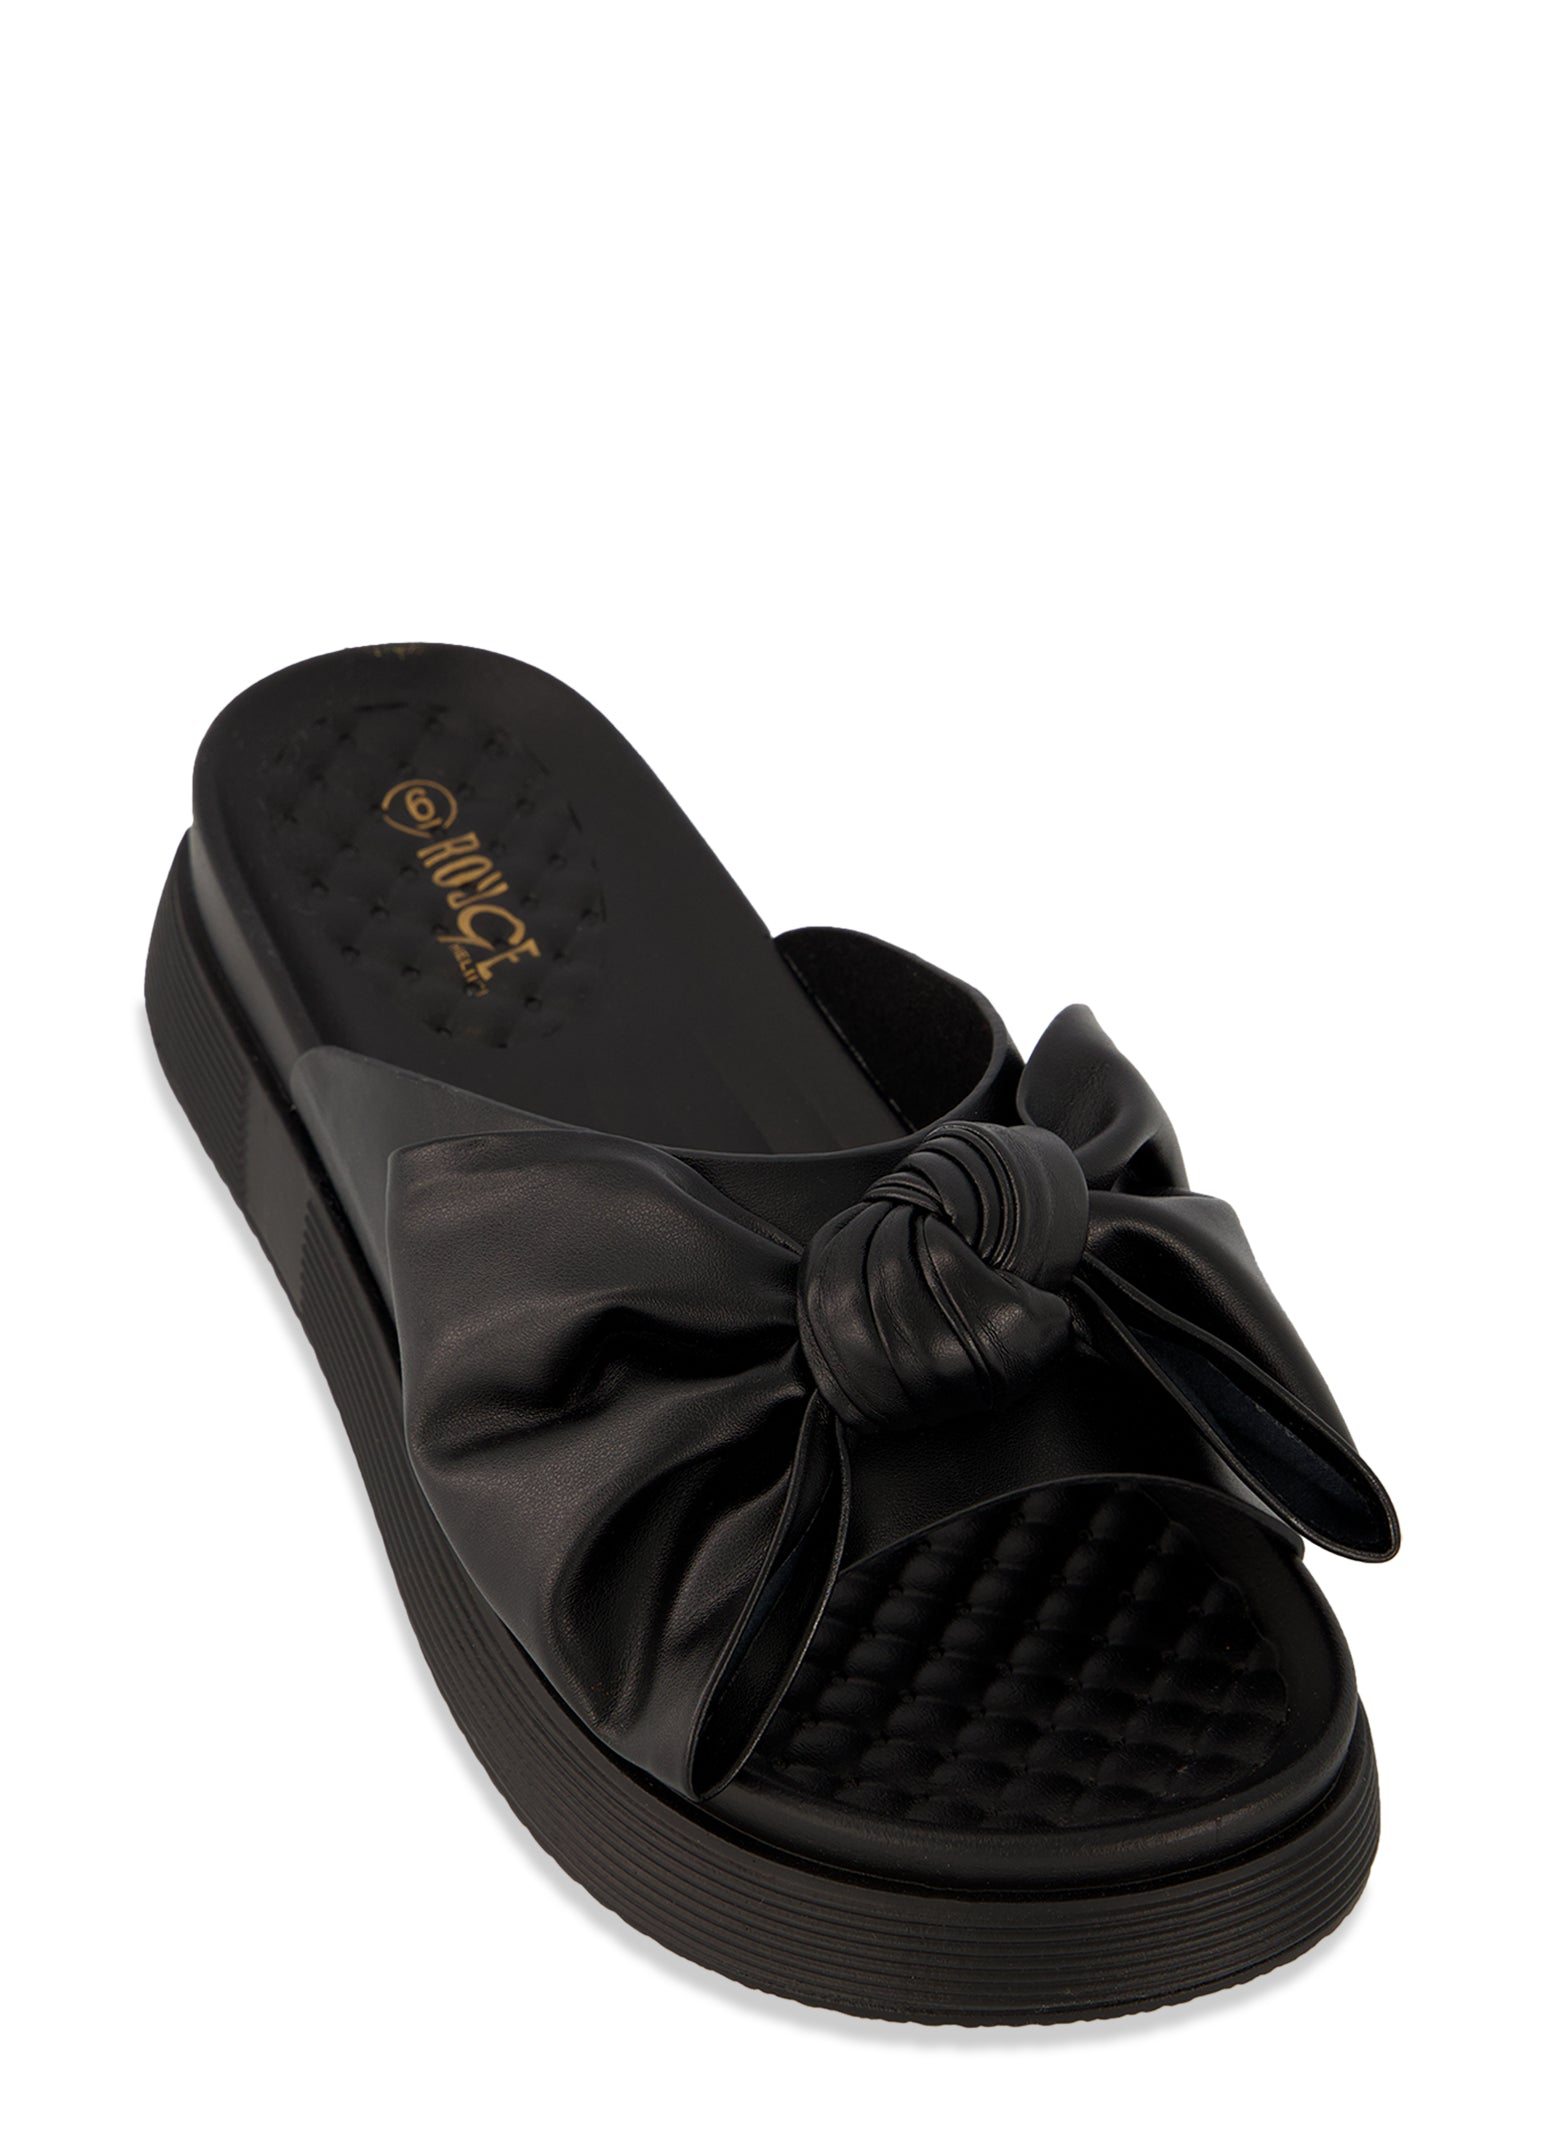 Bow Tie Band Slide Sandals